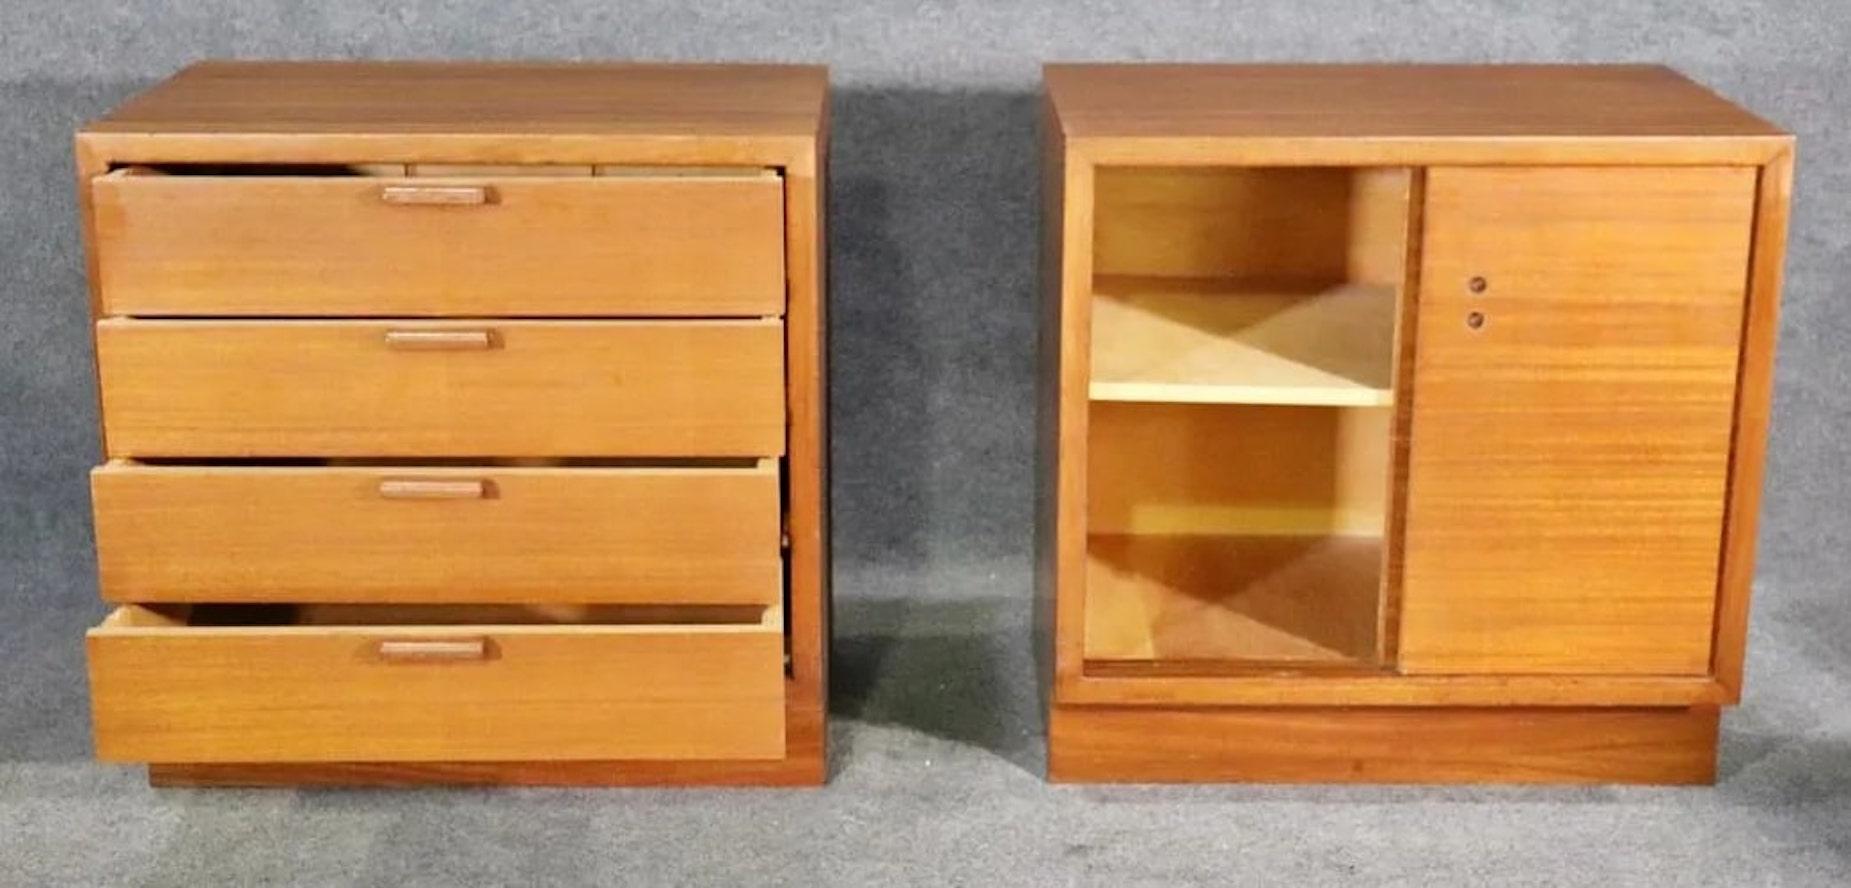 Set of teak cabinets made by the Buchner Company. One has 4 drawers and measures 30